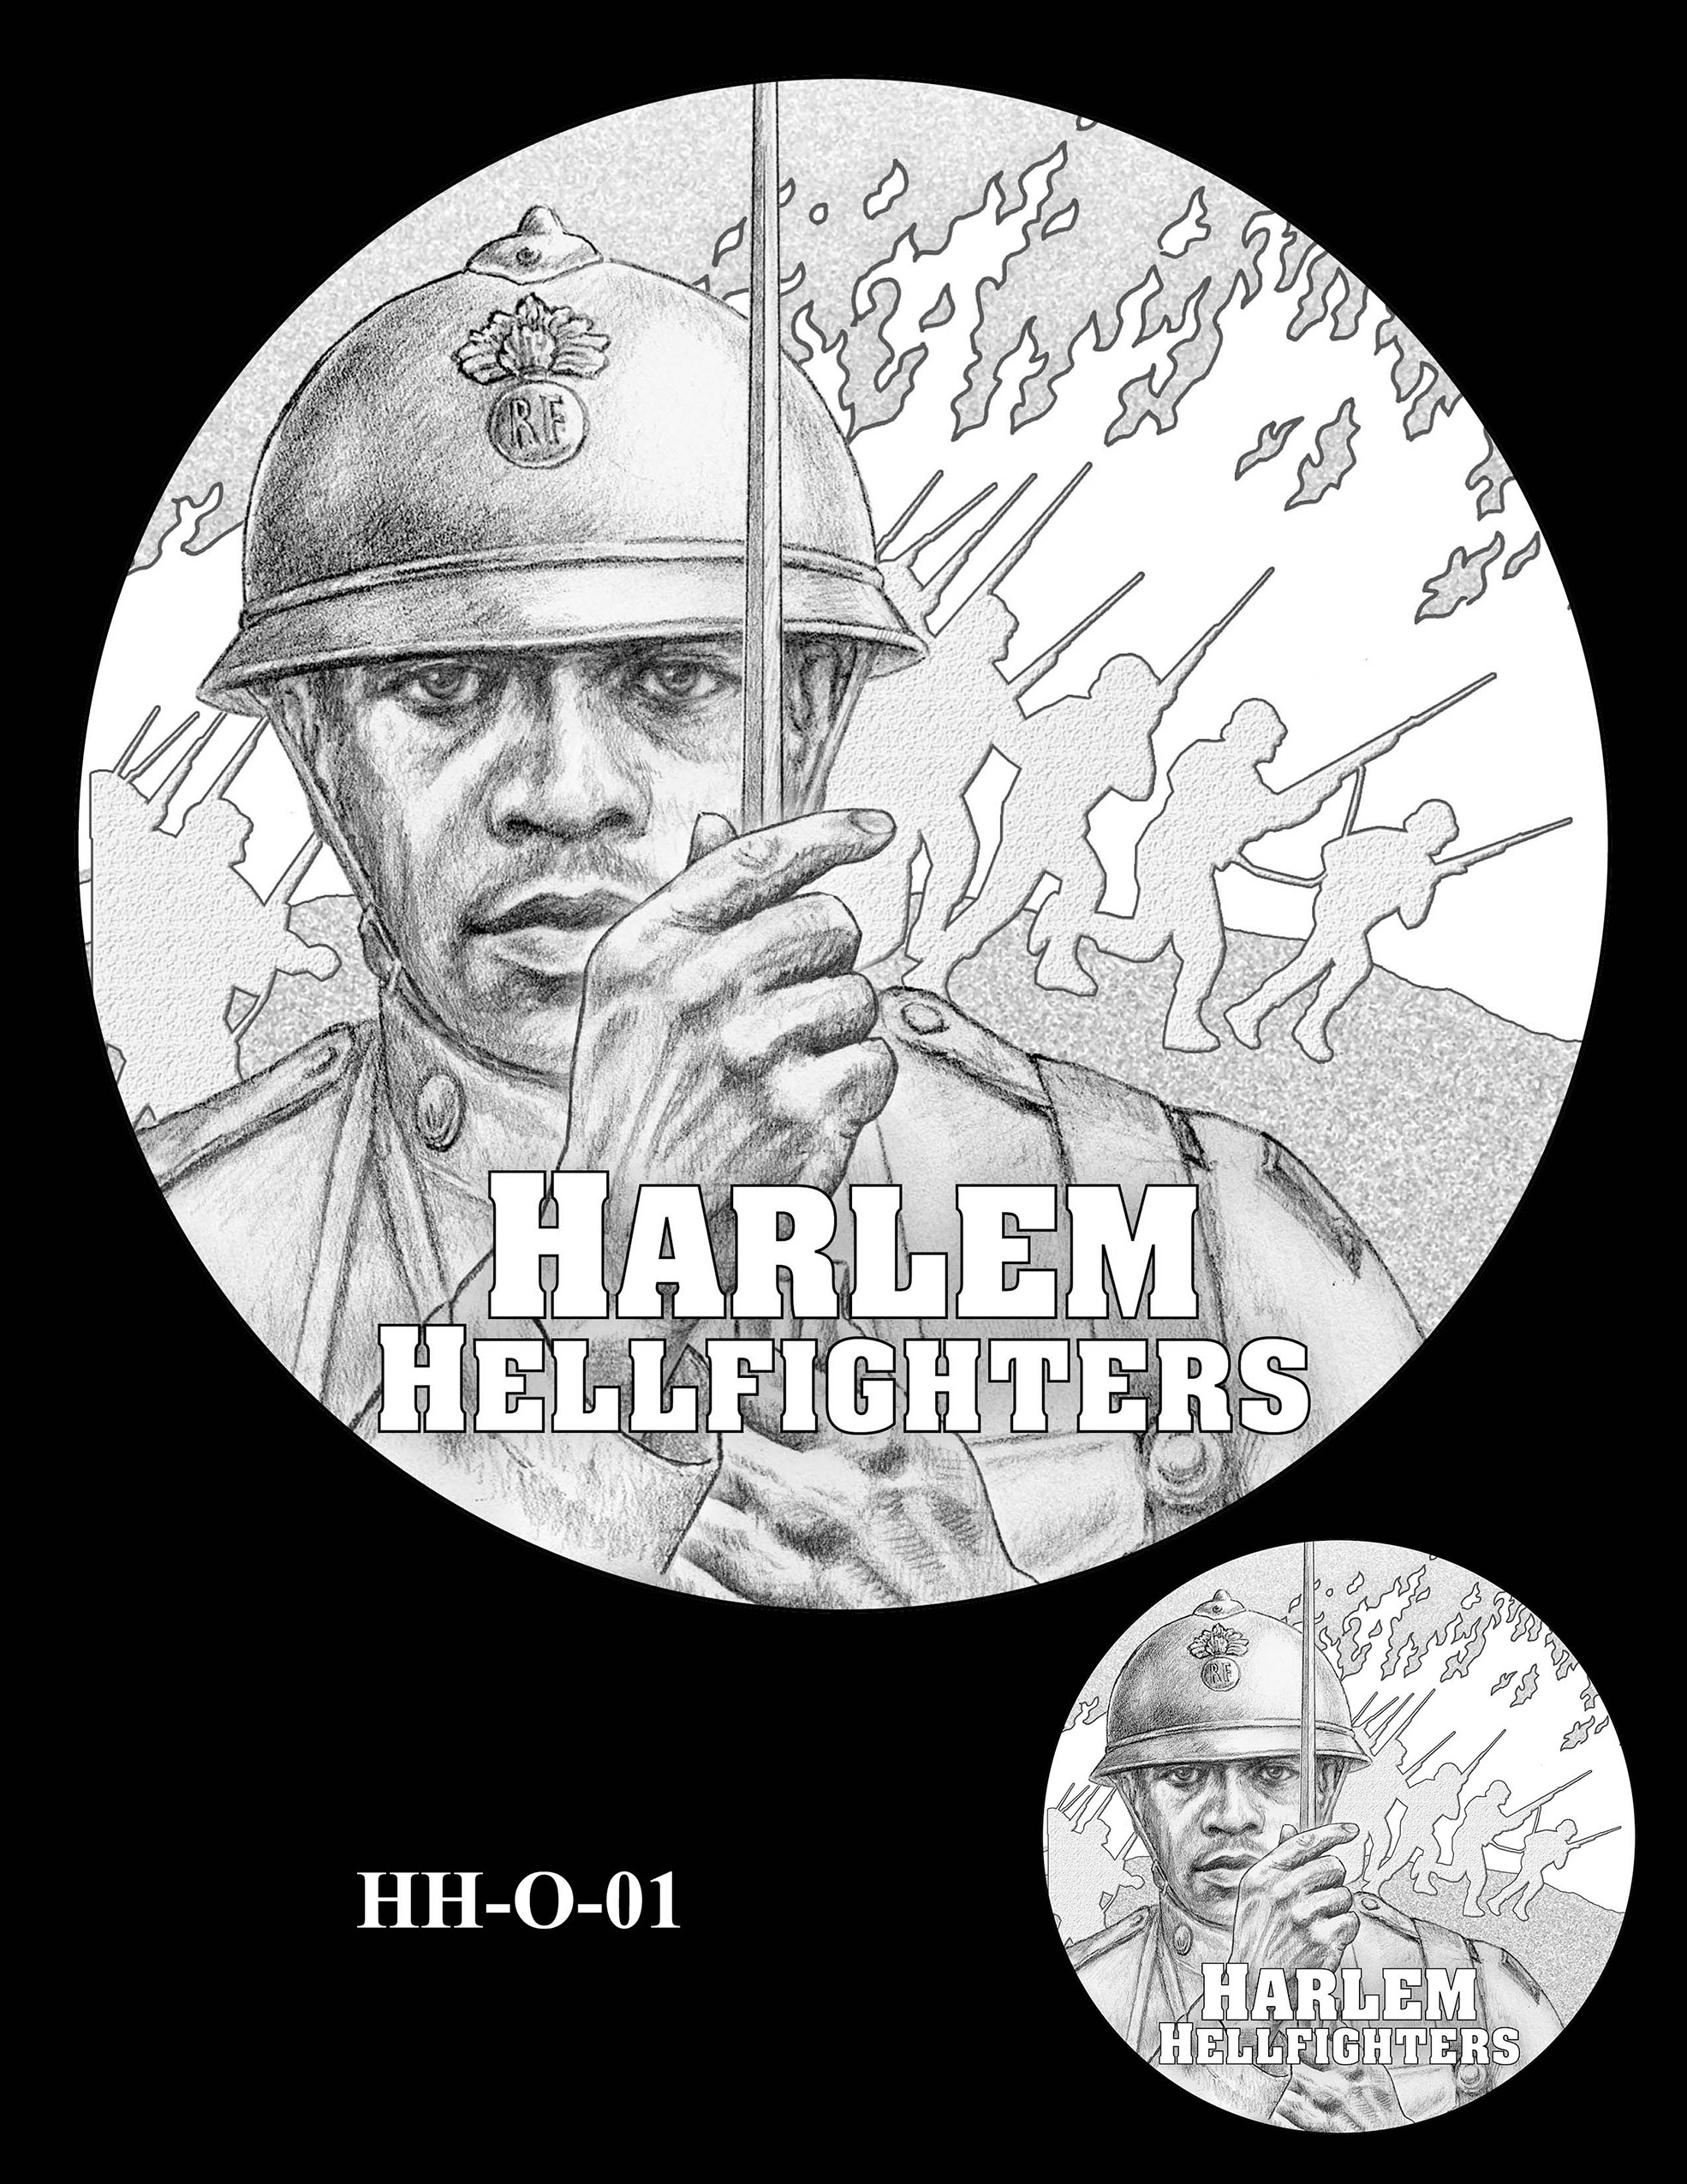 HH-O-01 -- Harlem Hellfighters Congressional Gold Medal